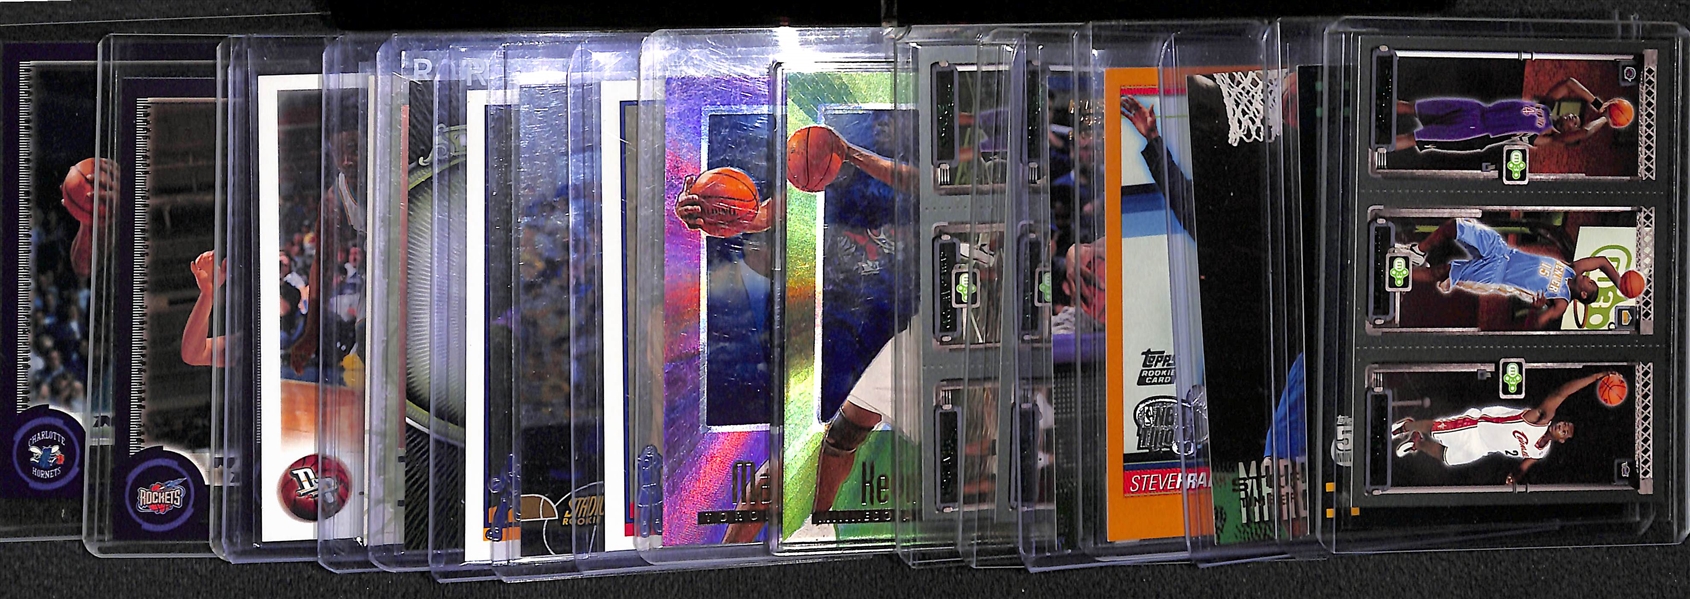 Lot of (18) Early 2000s Basketball Stars Featuring Lebron James and Kevin Durant Rookie Cards